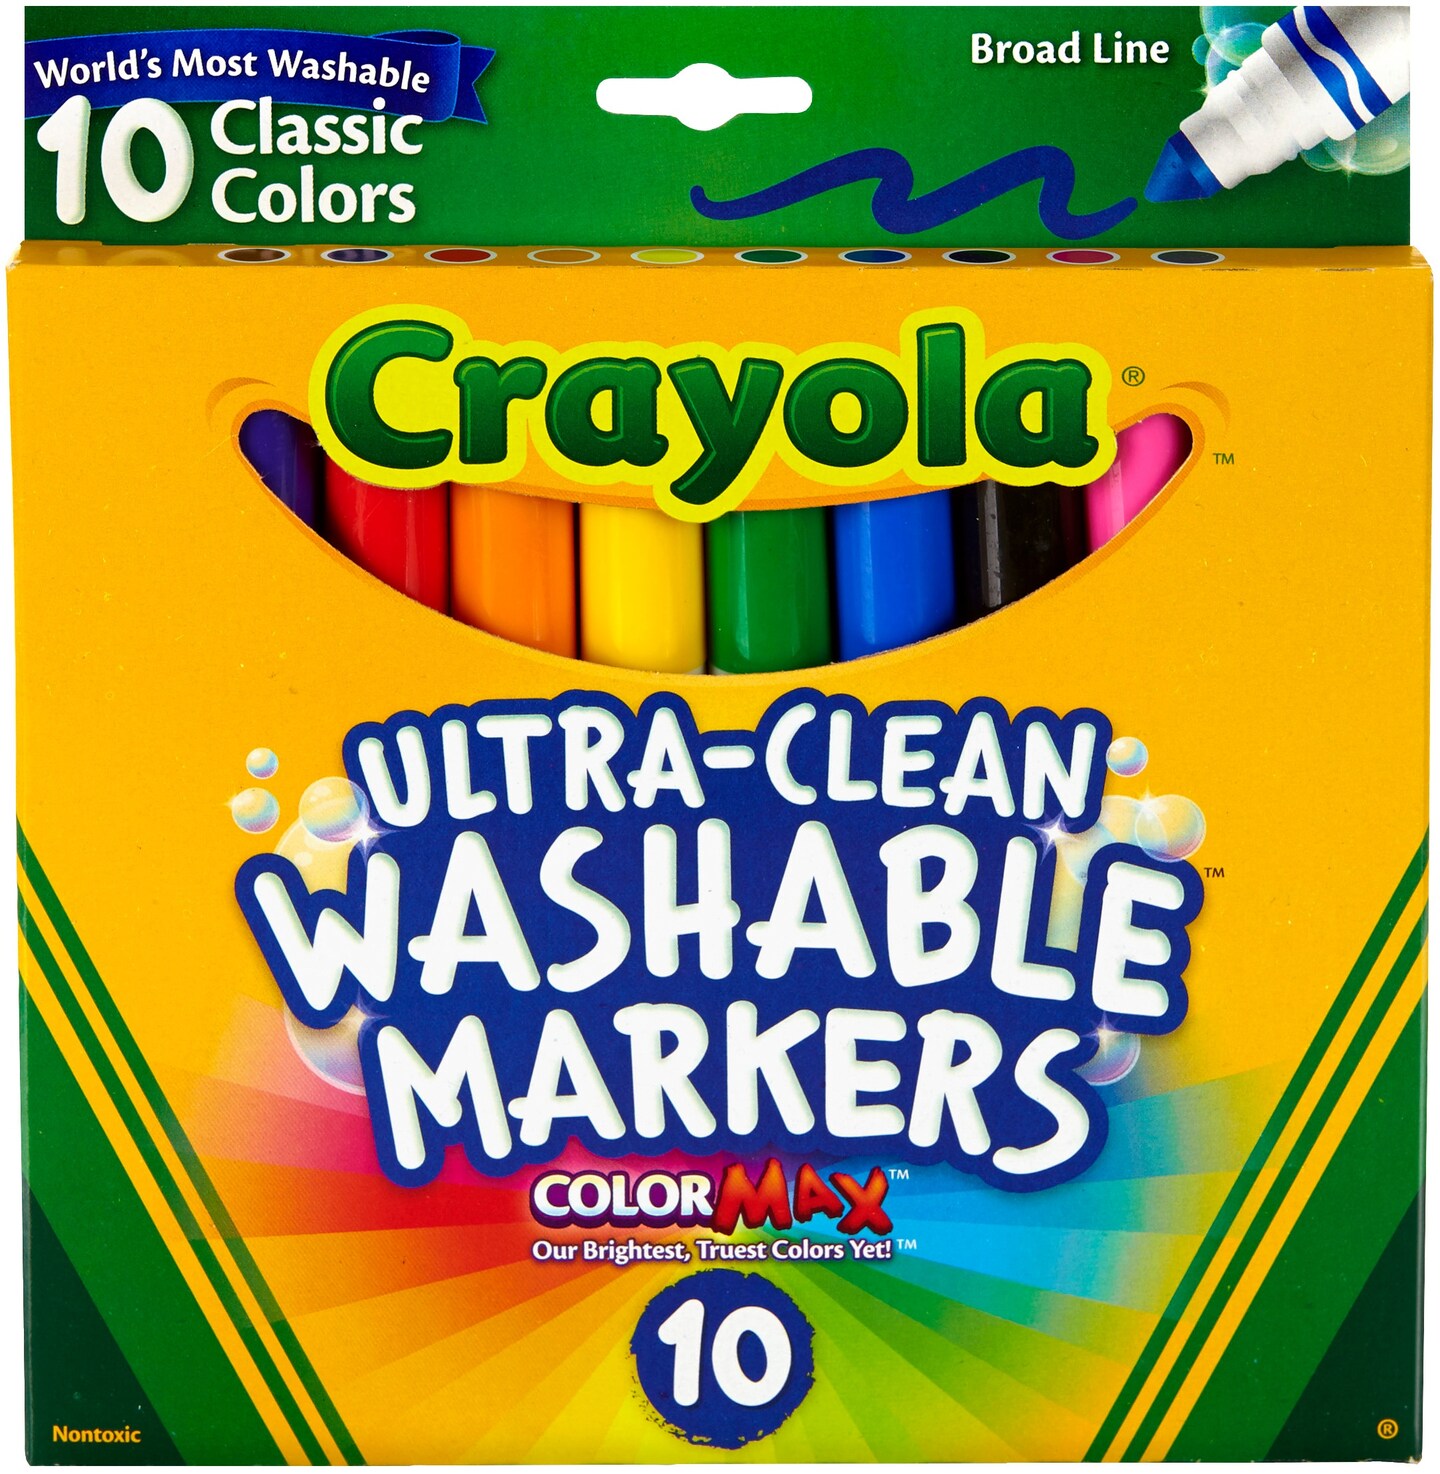 Crayola Ultra-Clean Washable Markers Color MAX: What's Inside the